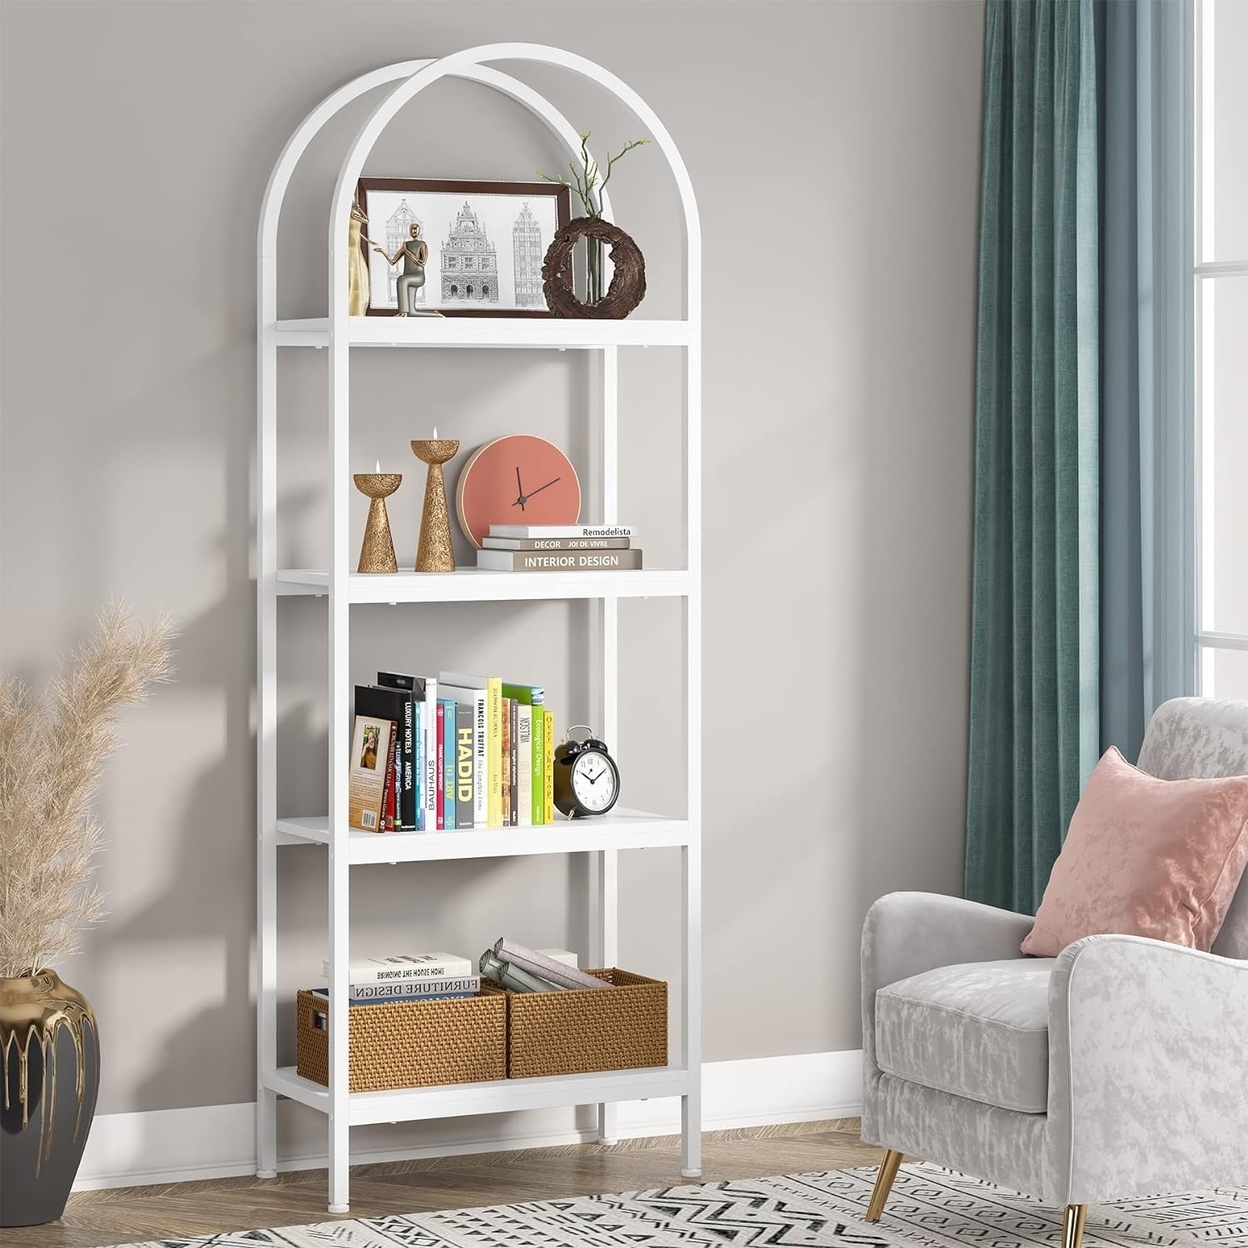 Tribesigns 70.87 4-Tier Open Bookshelf, Industrial Wood Bookcase Storage Shelves With Metal Frame - White, 1pc